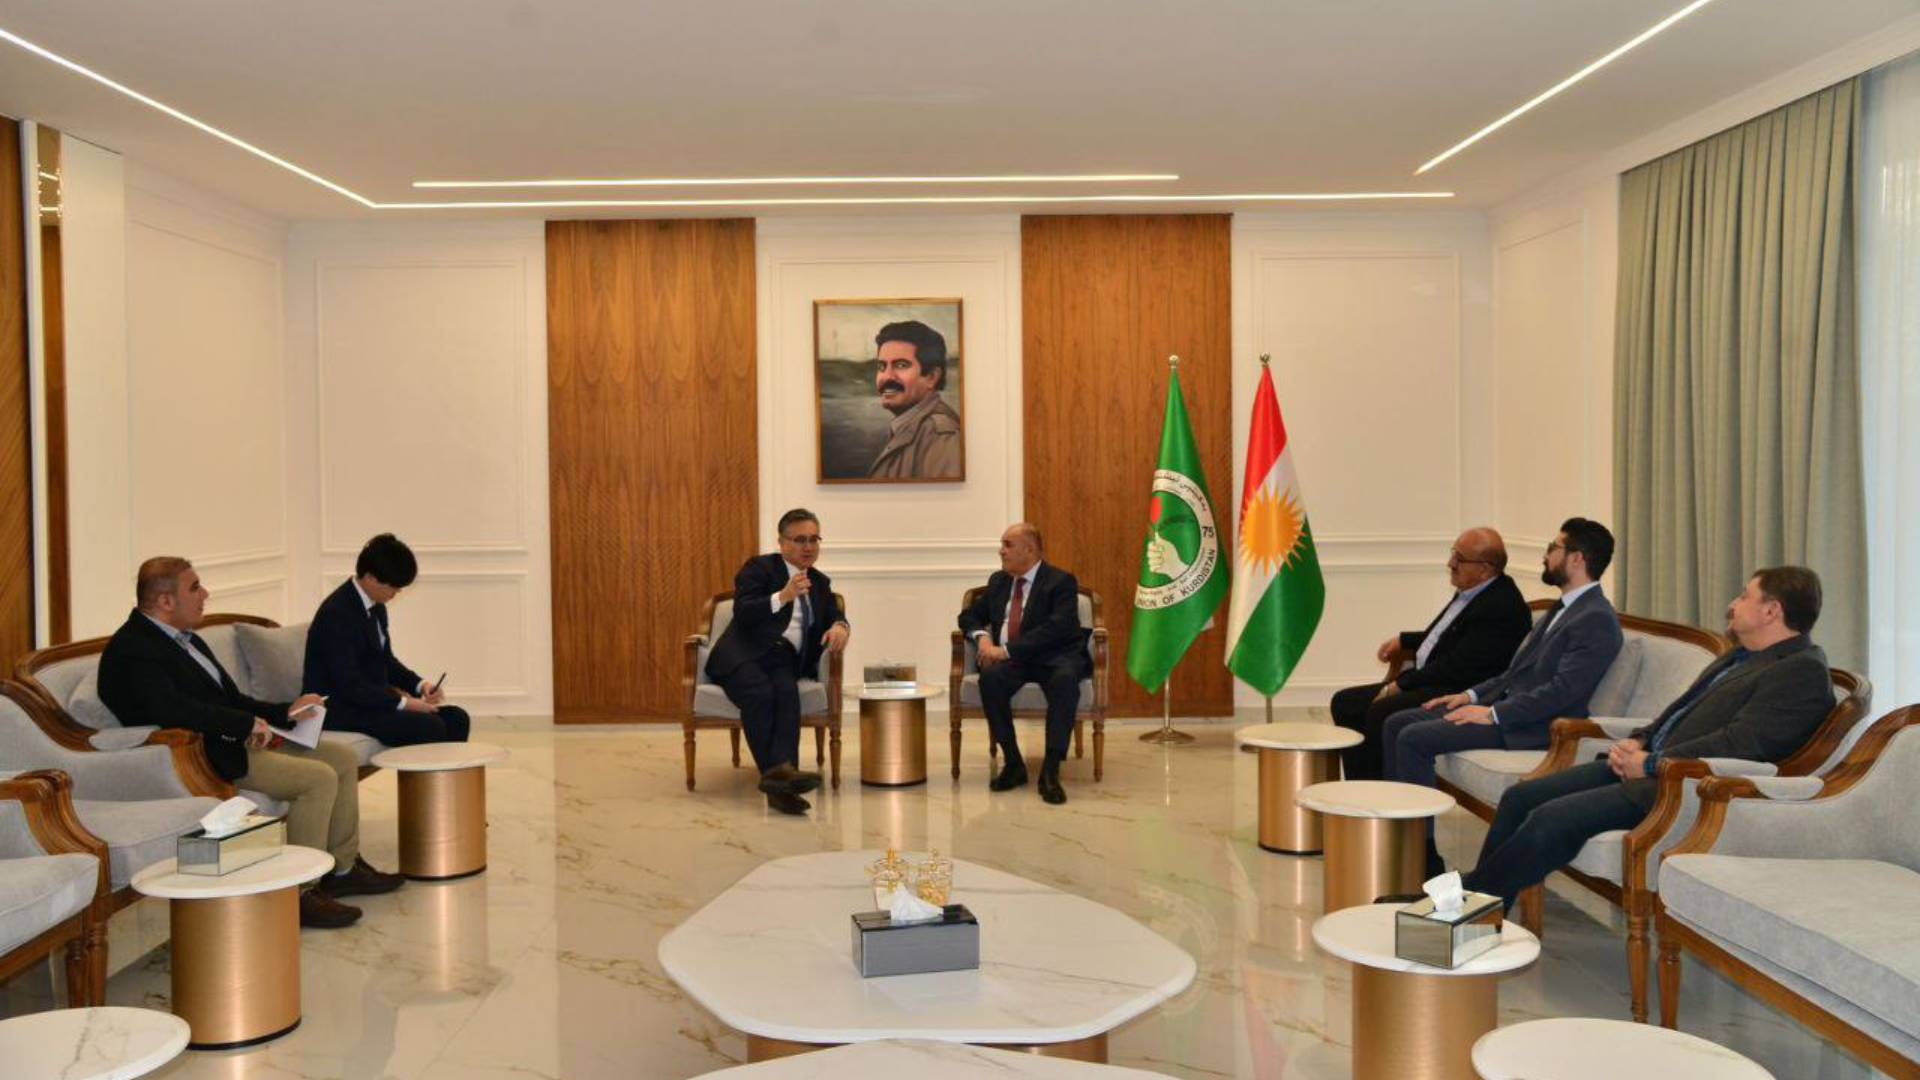  PUK's delegation of the right and the Japanese delegation on the left.